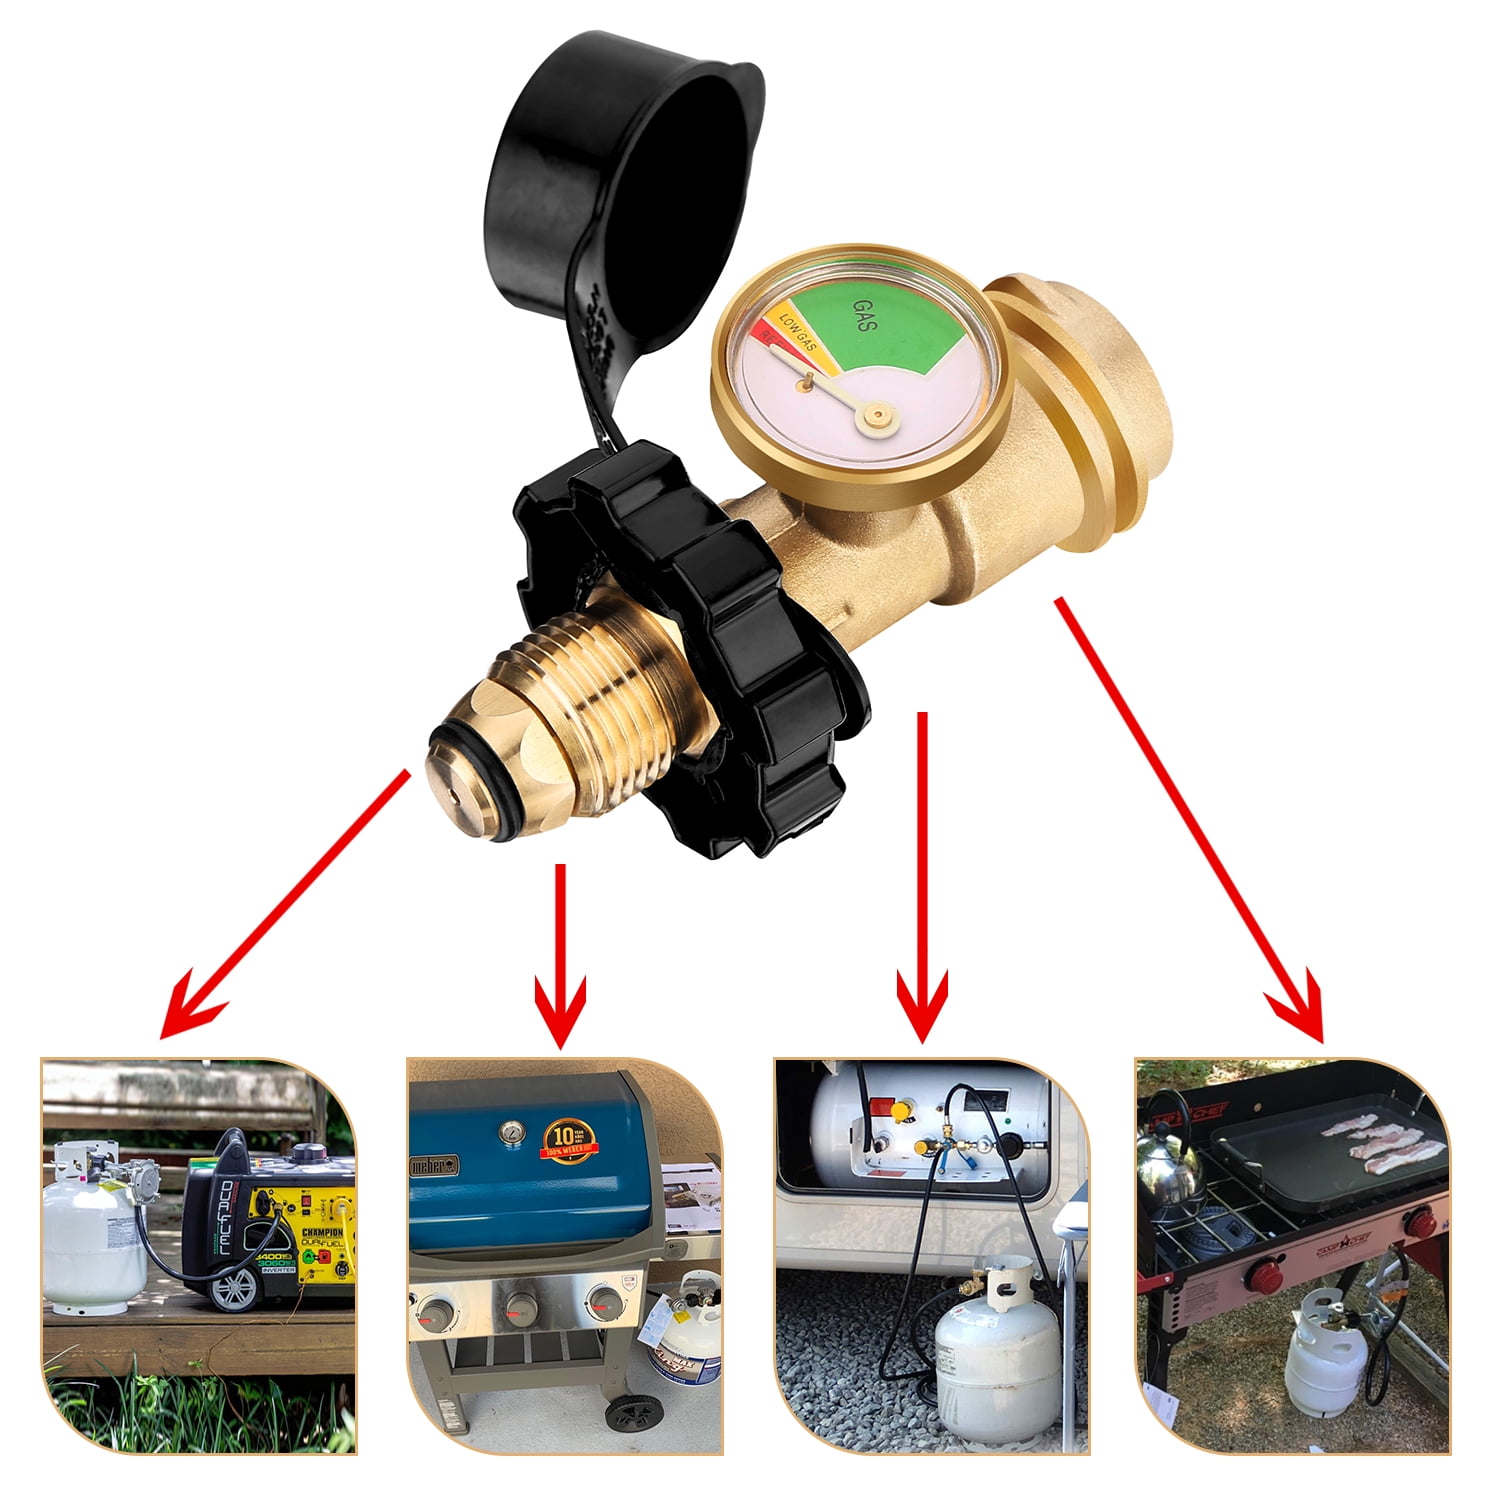 Wrench to Hand Tighten Old to Camplux Propane Tank Adapter Universal Converts POL LP Tank Service Valve to QCC 1/Type 1 